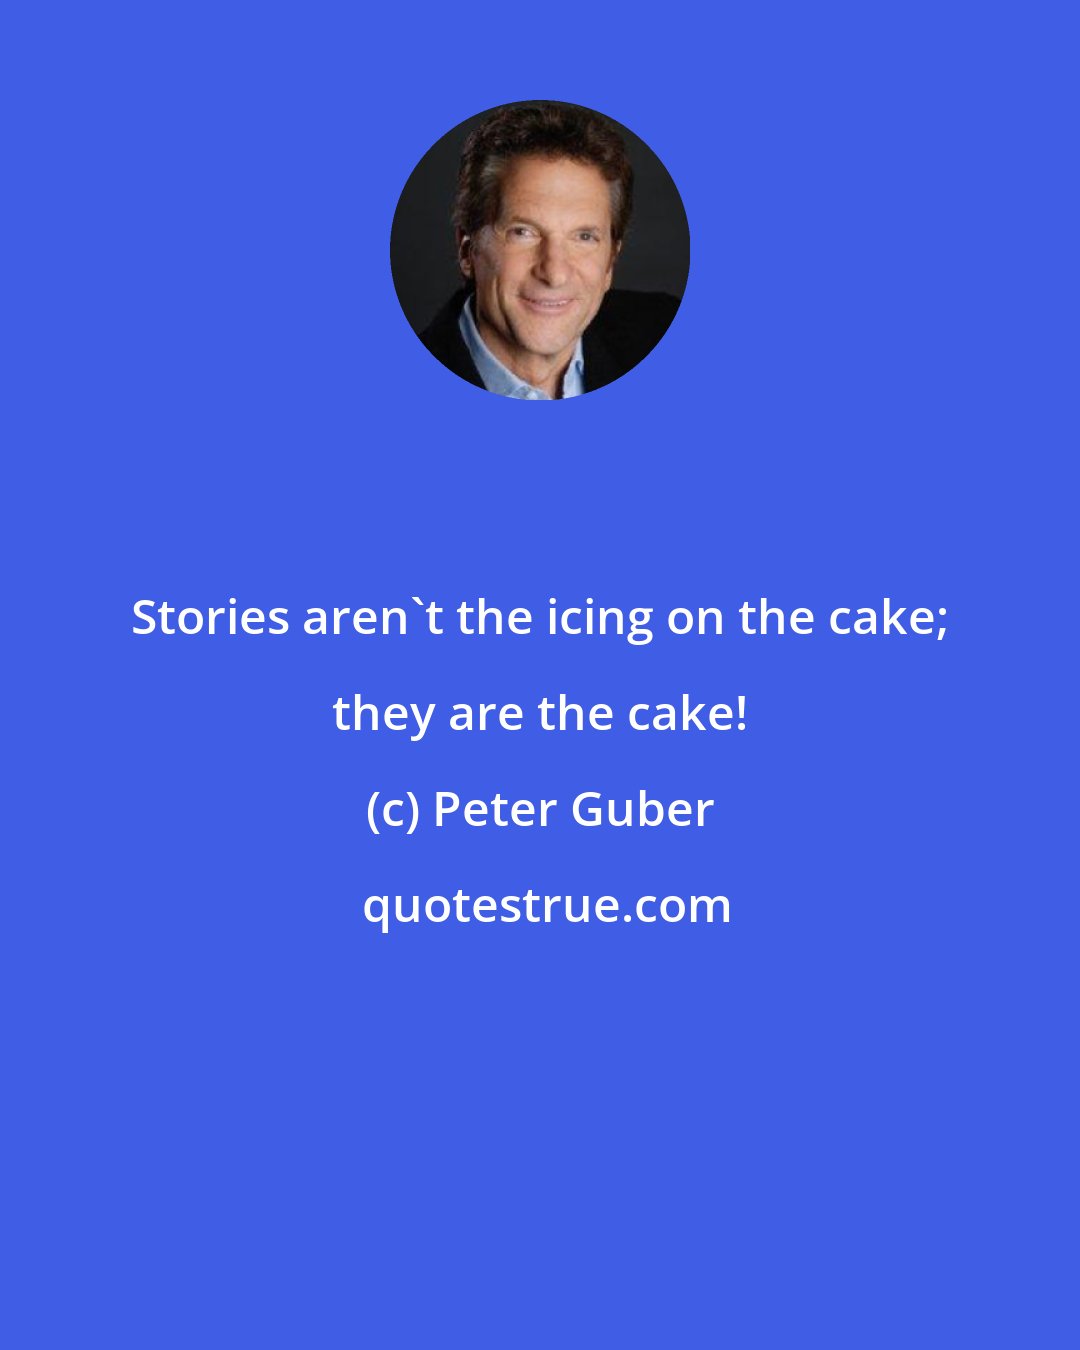 Peter Guber: Stories aren't the icing on the cake; they are the cake!